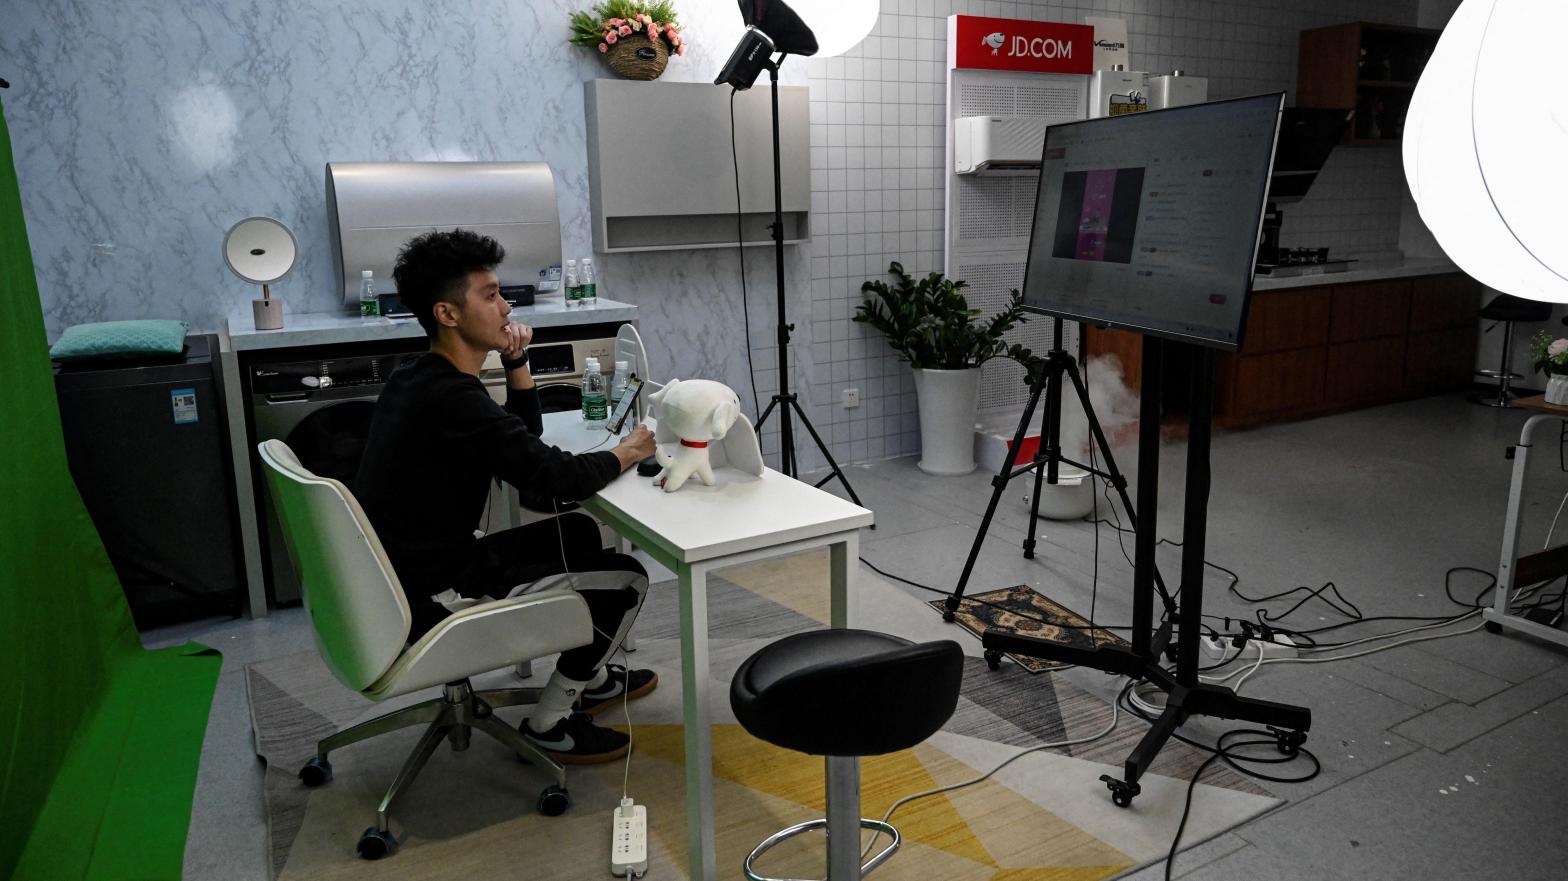 A livestreamer sells products at a JD outsourcing livestream company in Beijing, China on November 9, 2021. (Photo: Jade Gao / AFP, Getty Images)